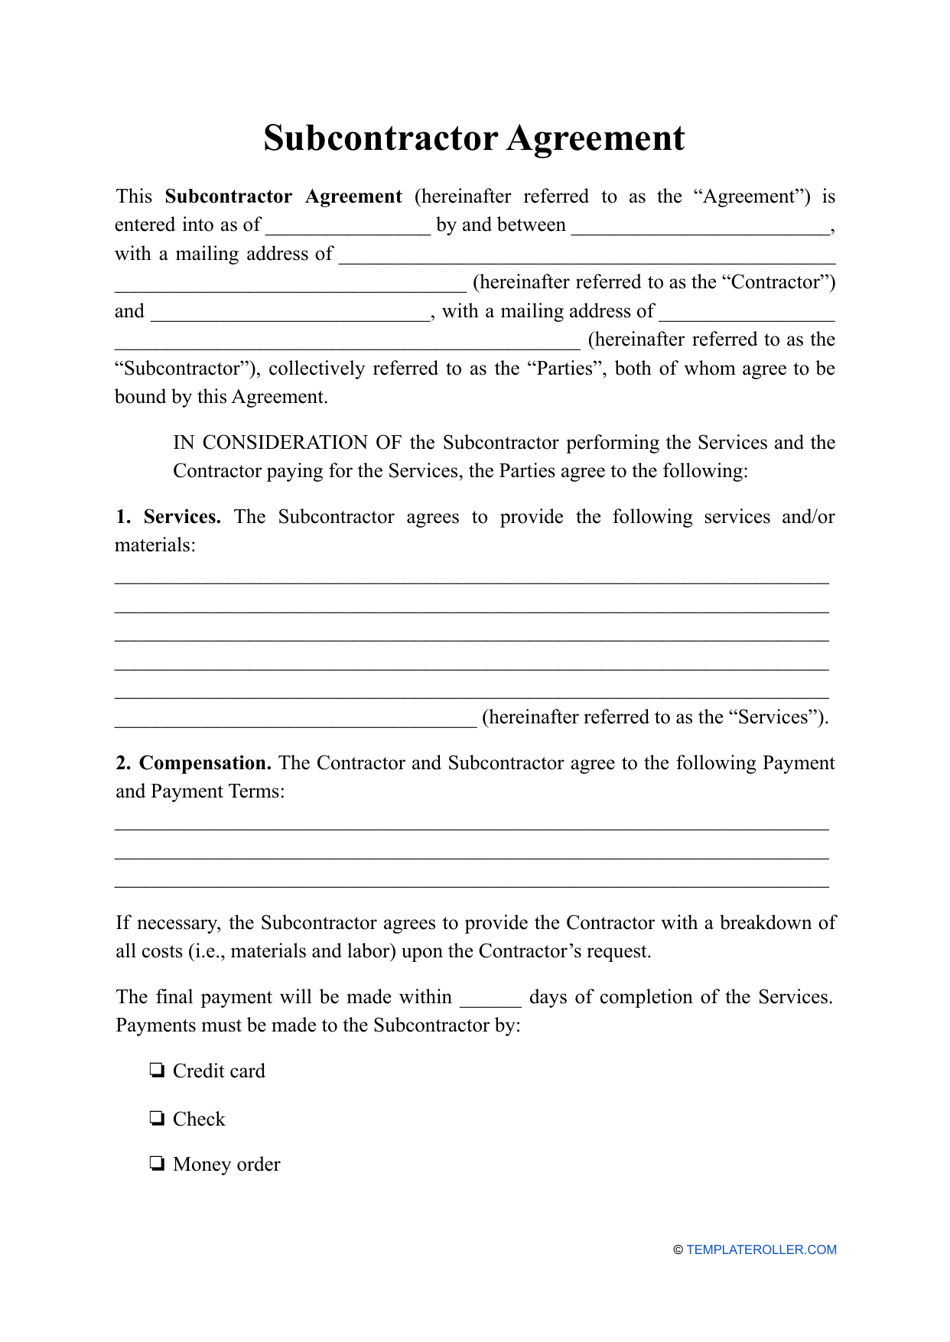 Sample Subcontractor Agreement Template